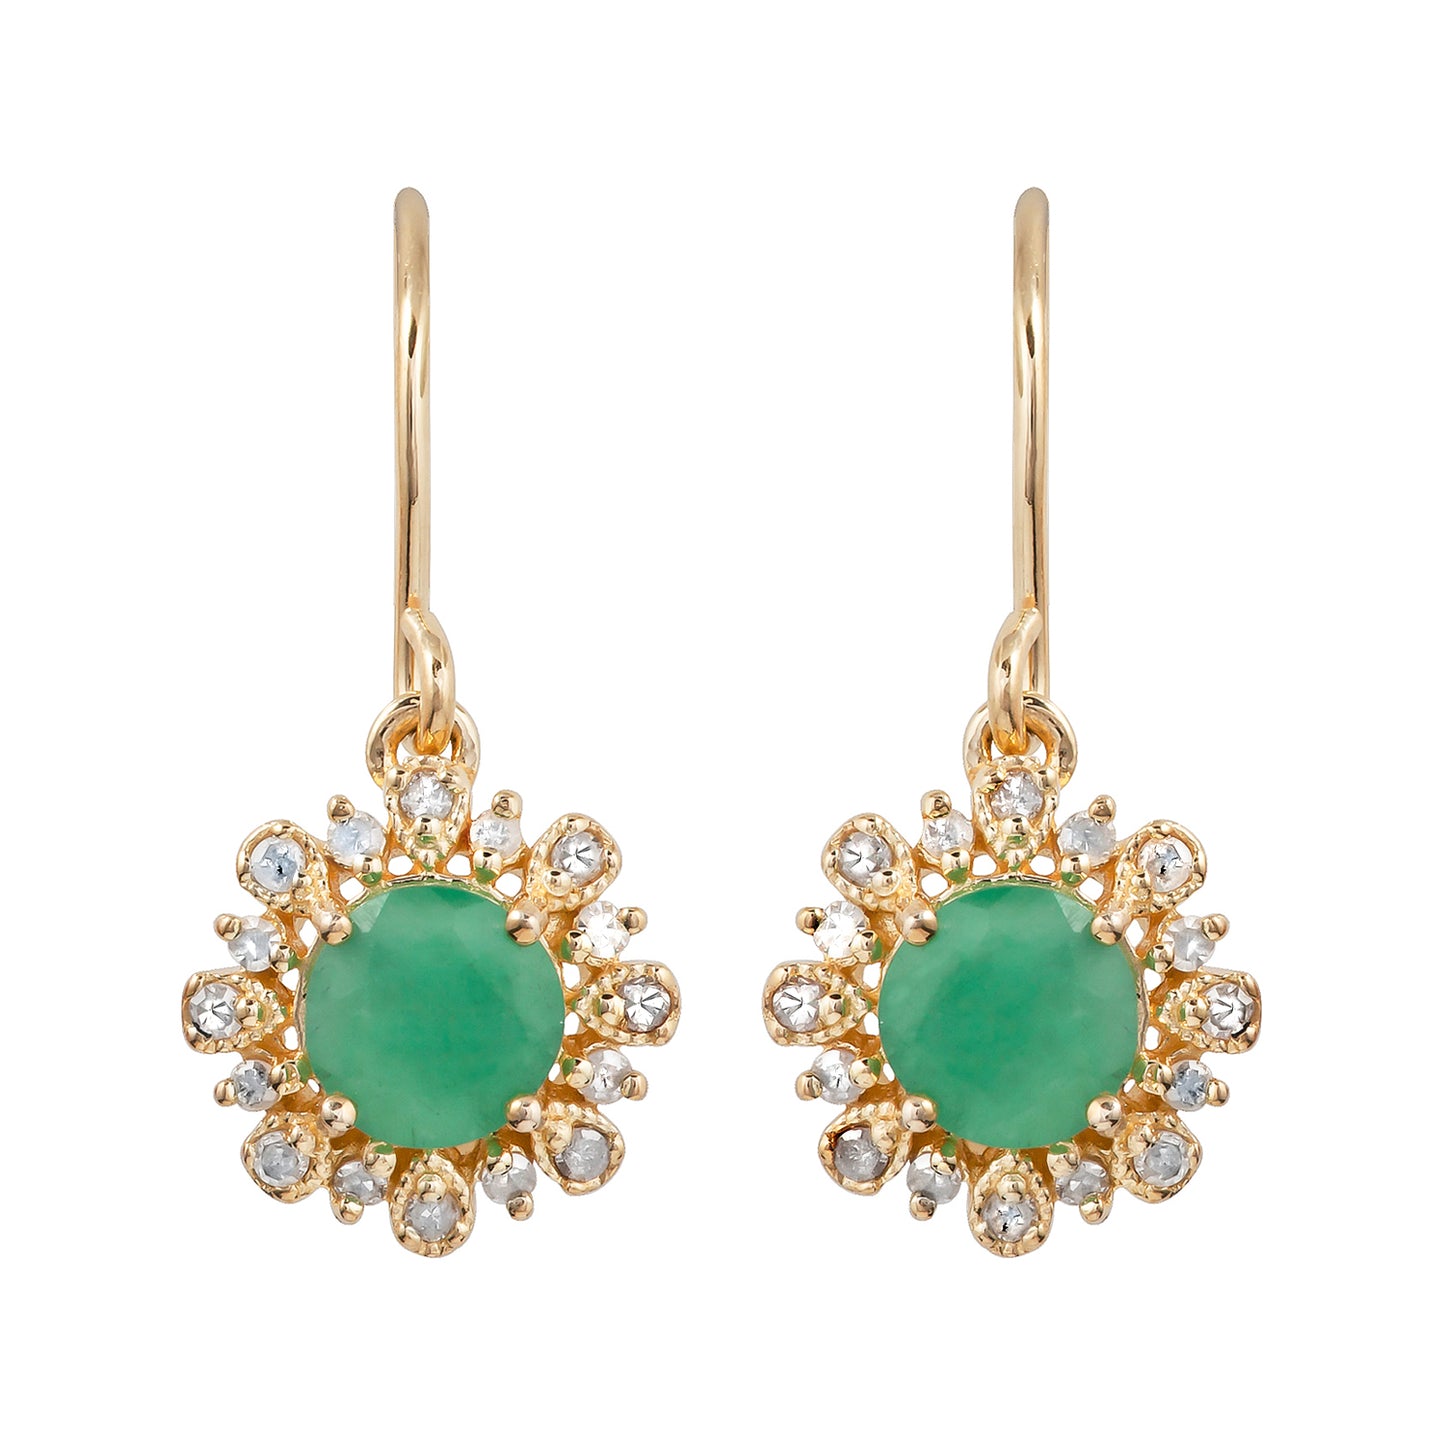 10k Yellow Gold Genuine Round Emerald and Diamond Vintage Style Halo Earrings